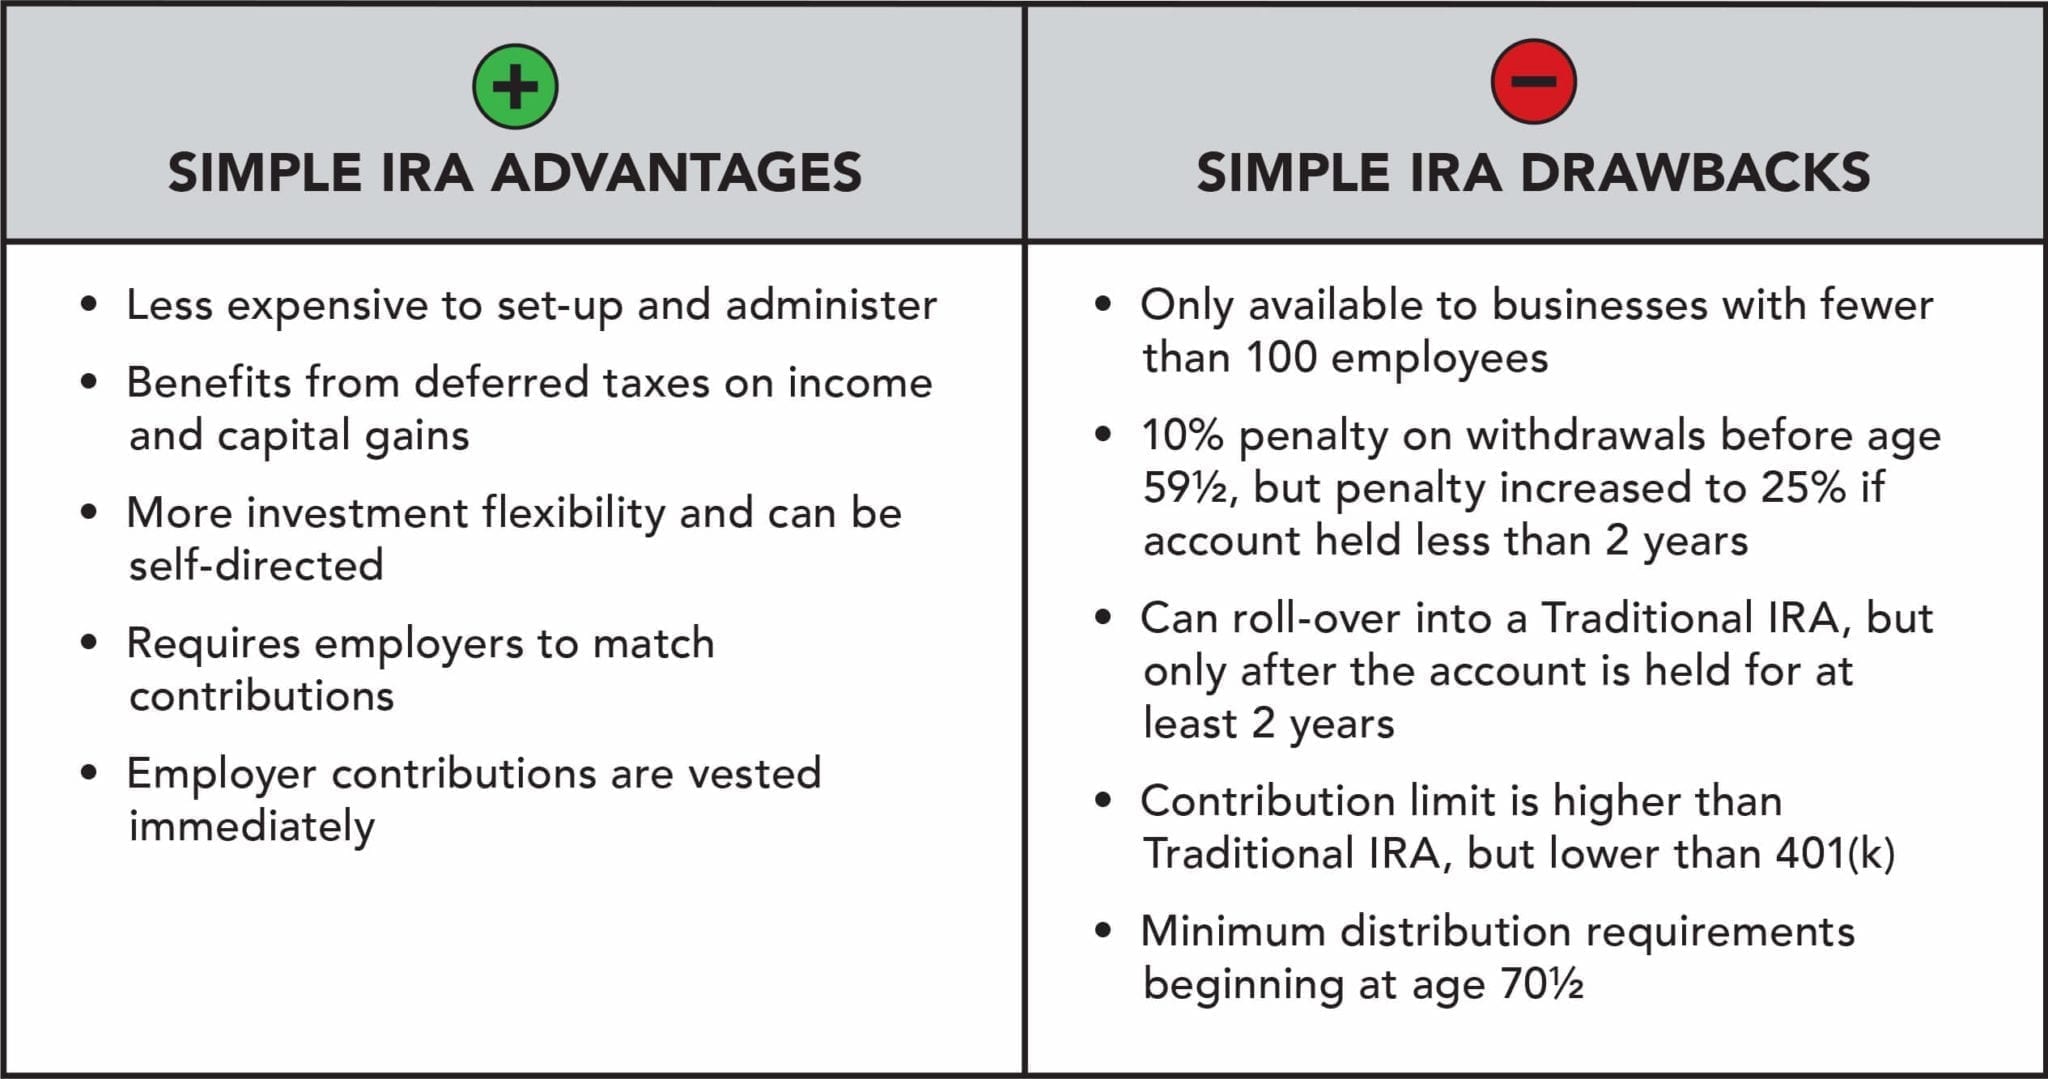 can a new employee contribute to a simple ira